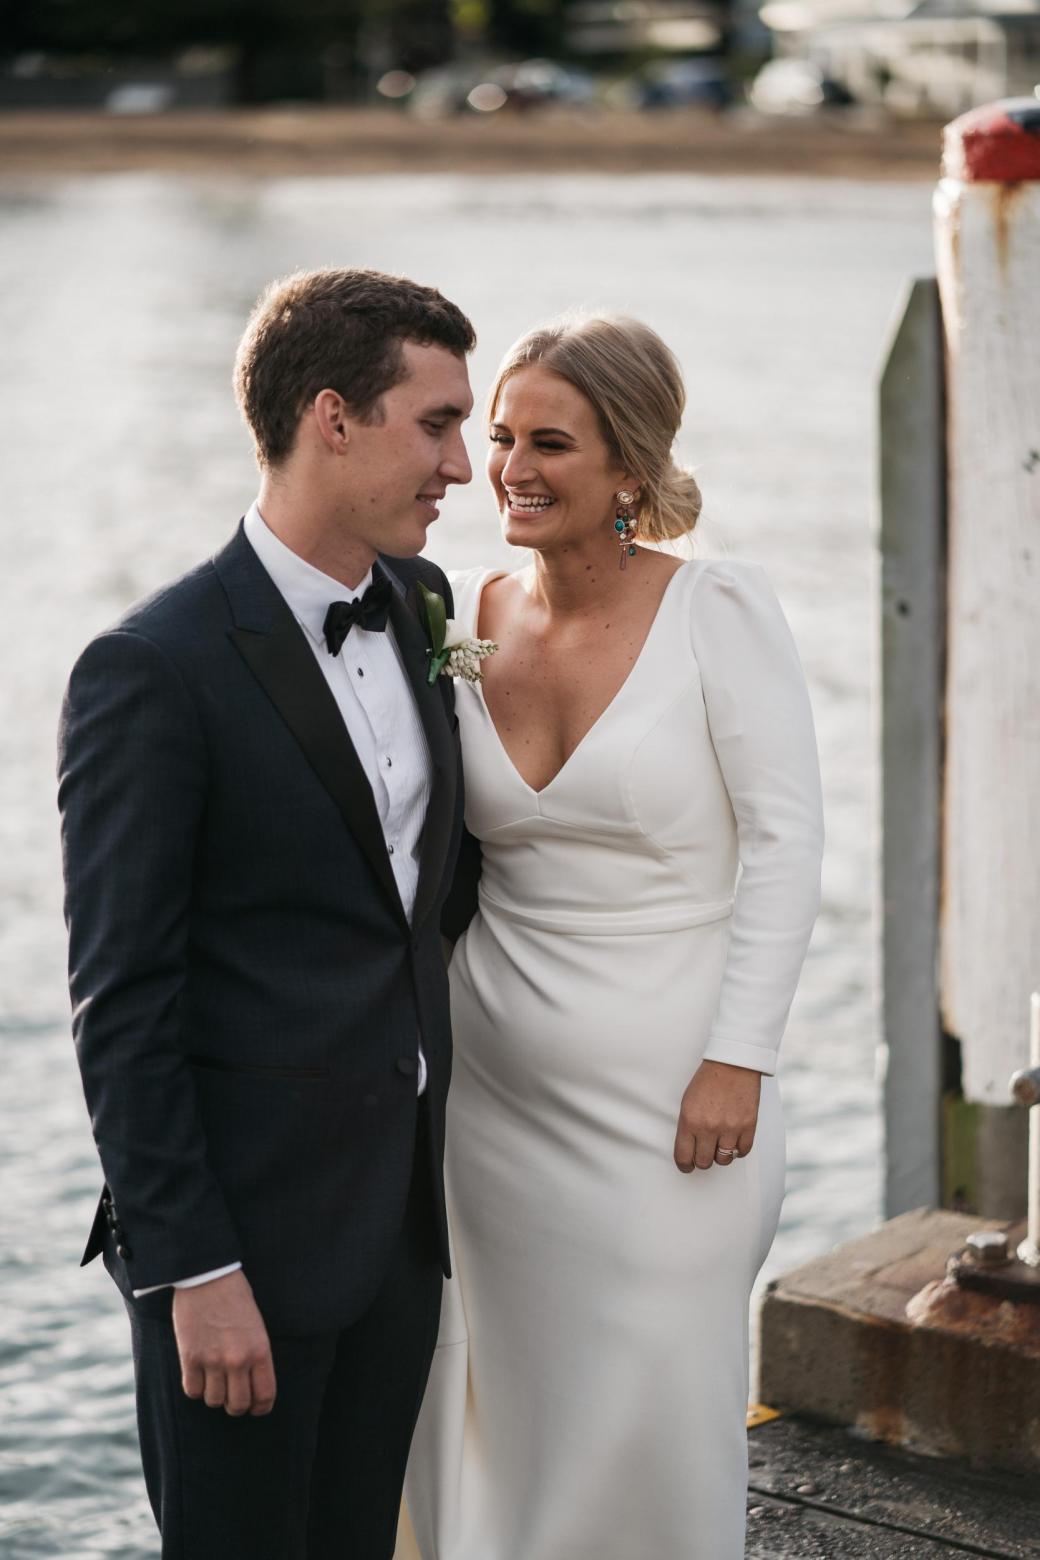 KWH bride Jordana with her new husband; wearing the AUBREY gown; a timeless long-sleeve wedding dress.